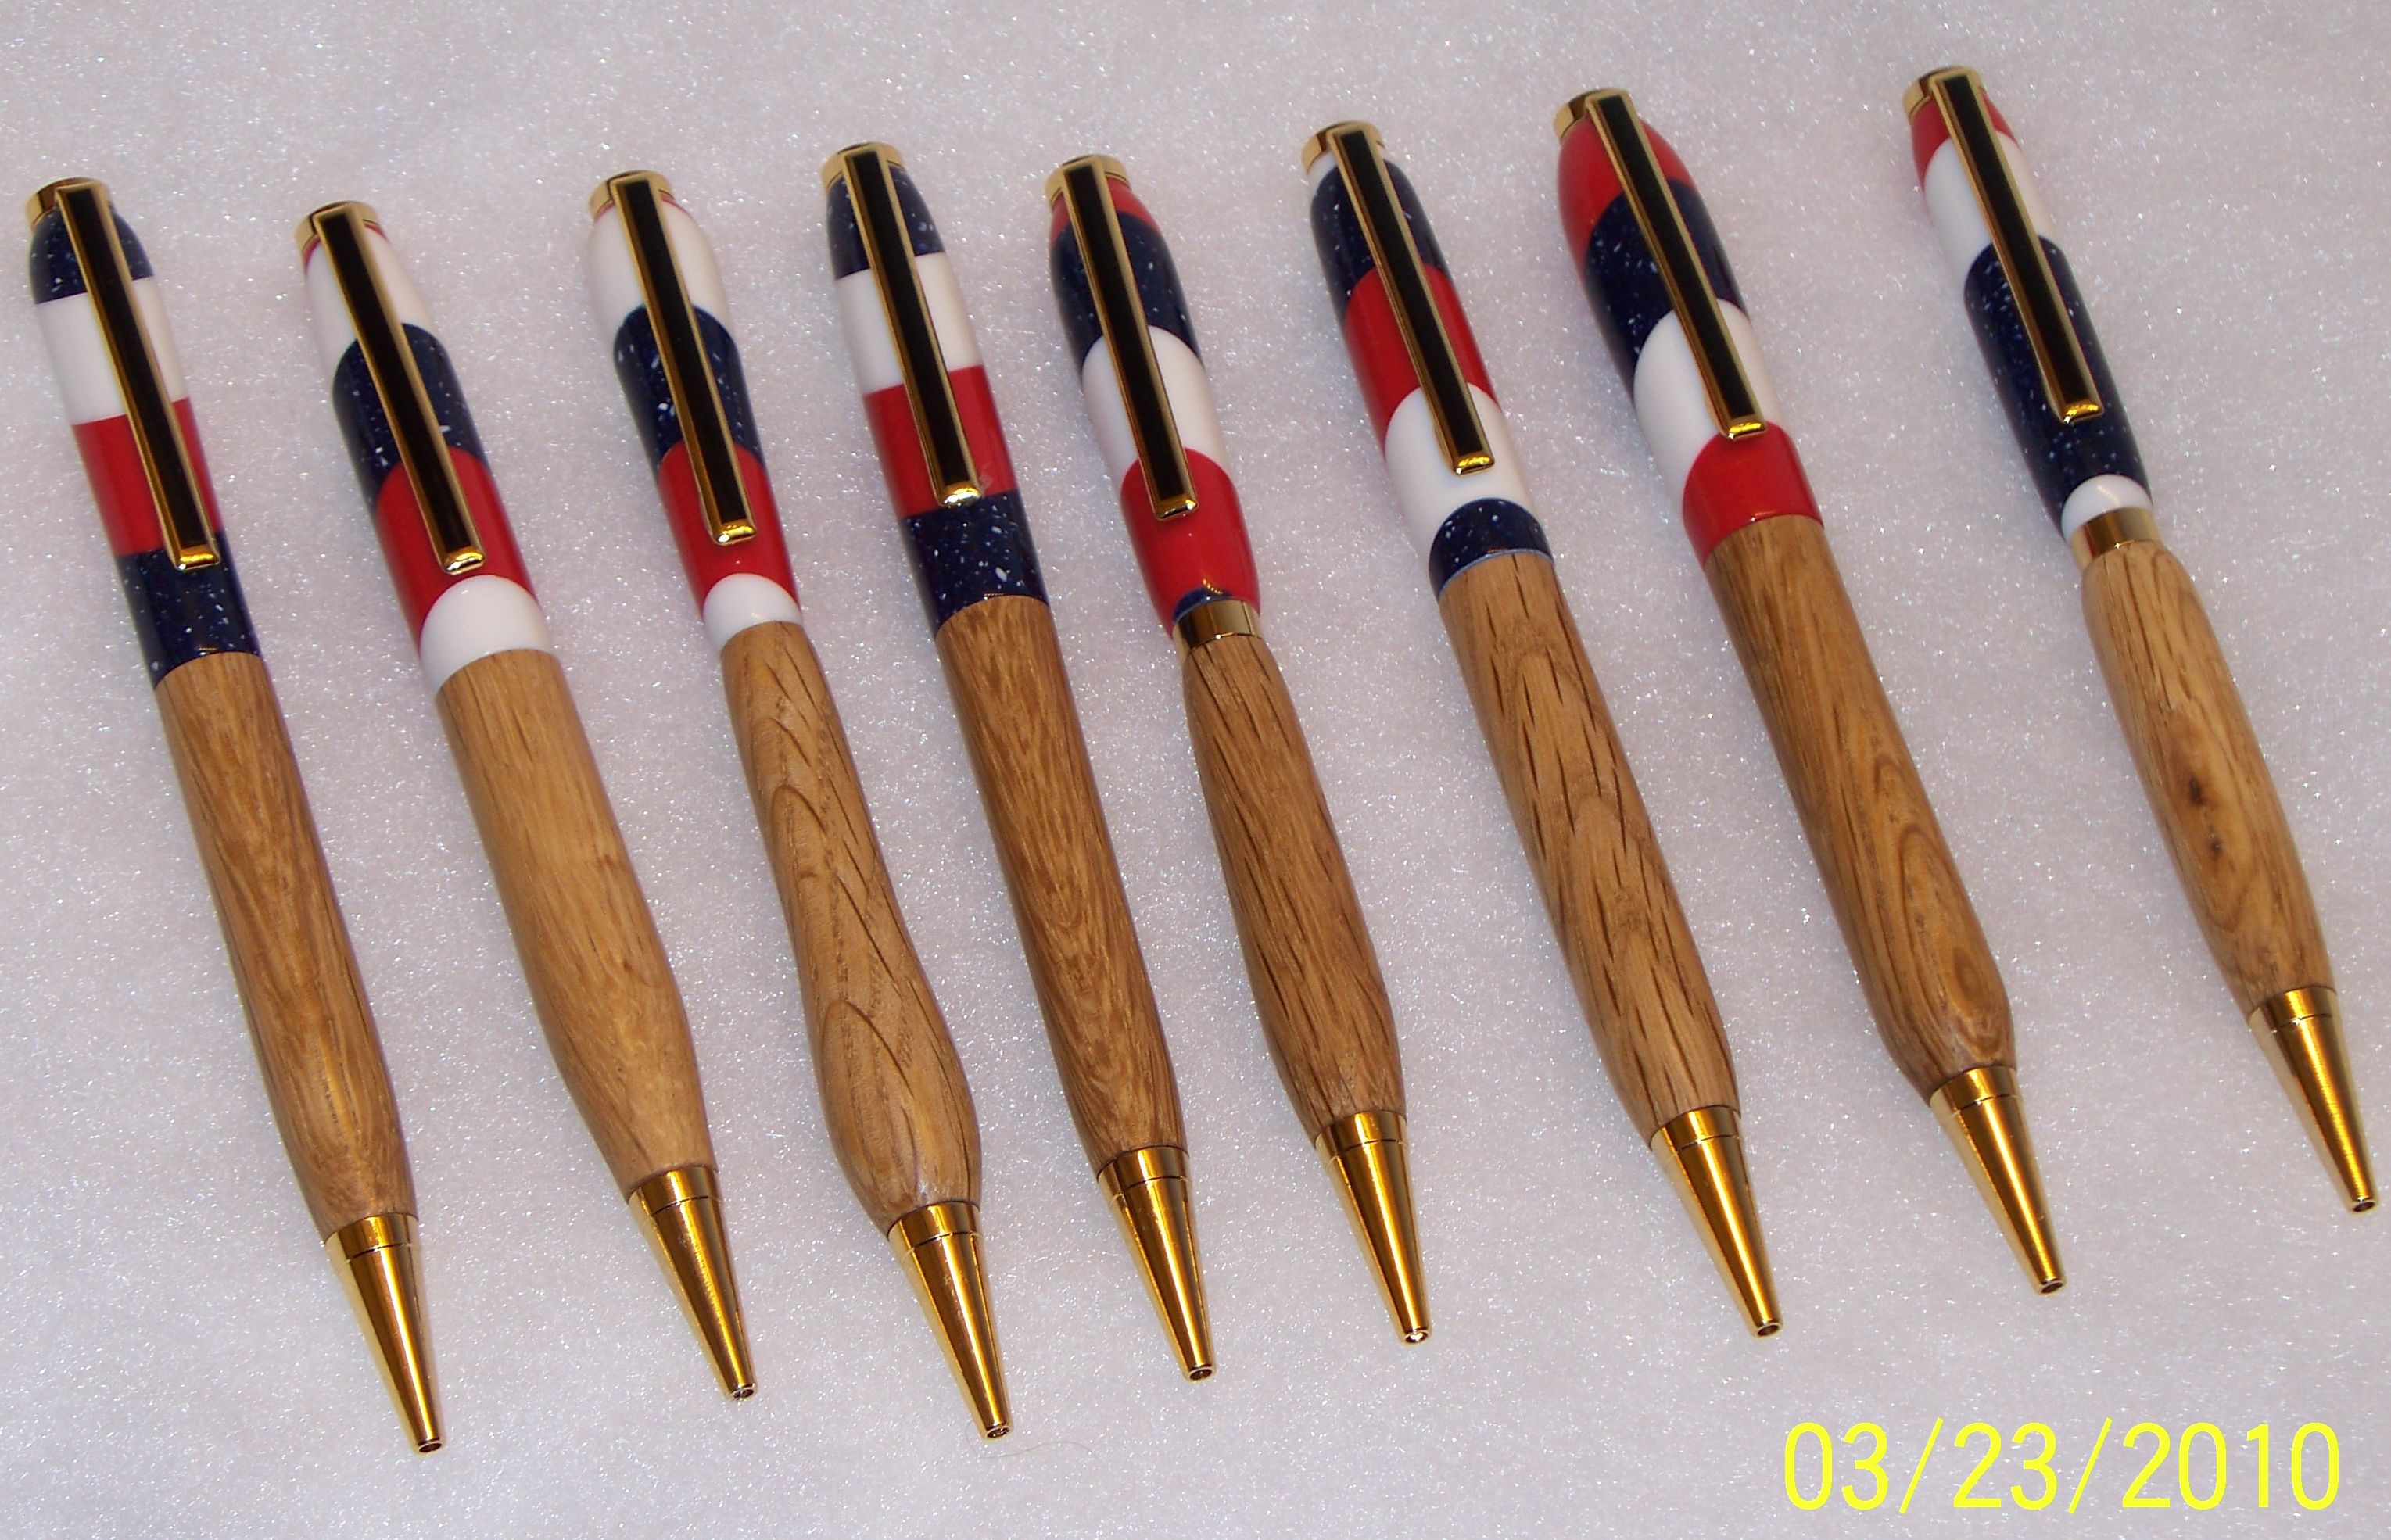  Pen Turning Pictures troops10.jpg for Turning Round 